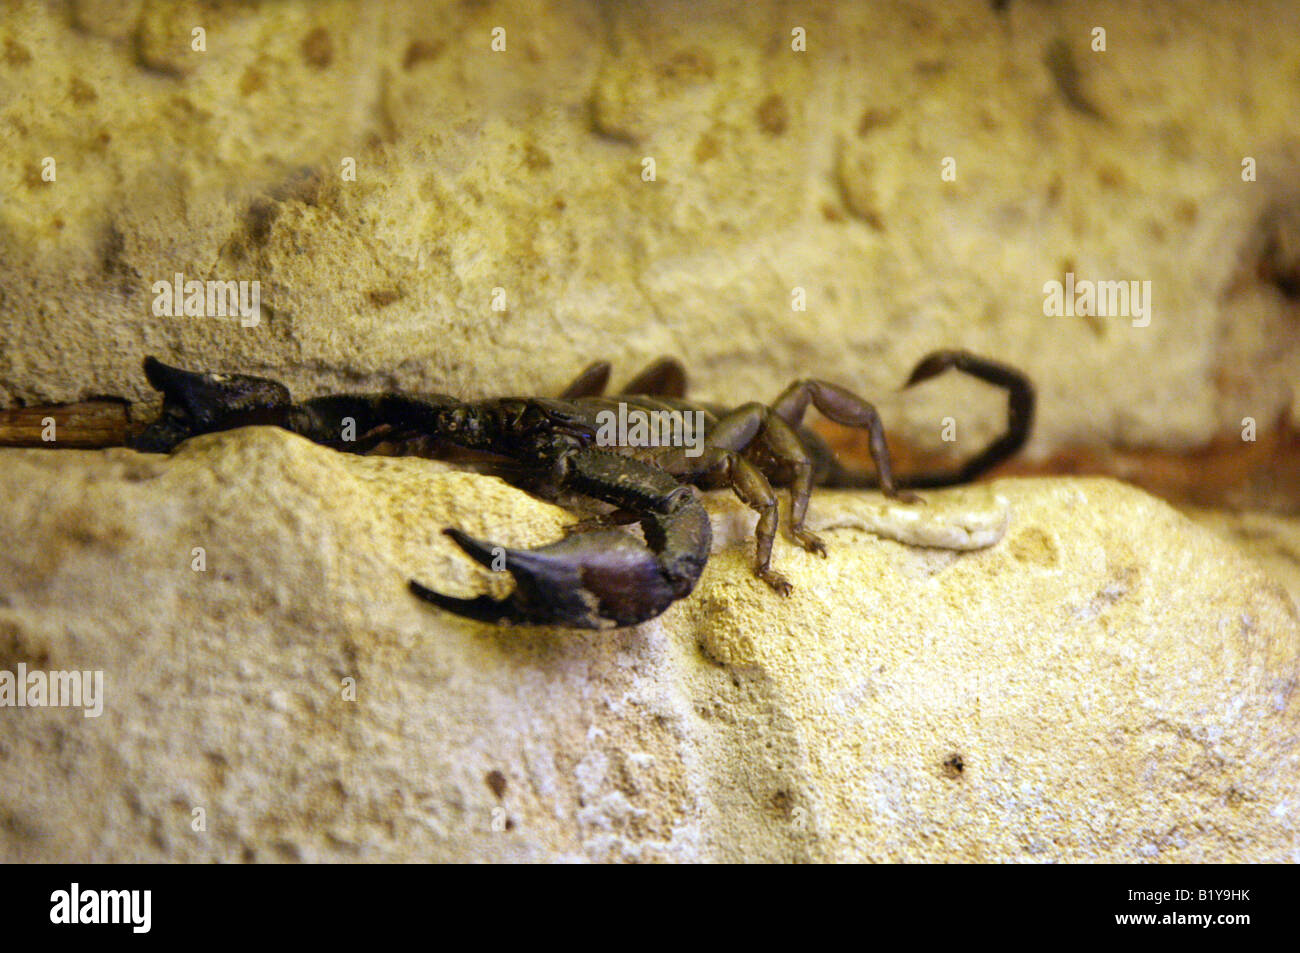 South African Rock Scorpion or The Flat Rock Scorpion, Hadogenes troglodytes. Southern Africa. Stock Photo